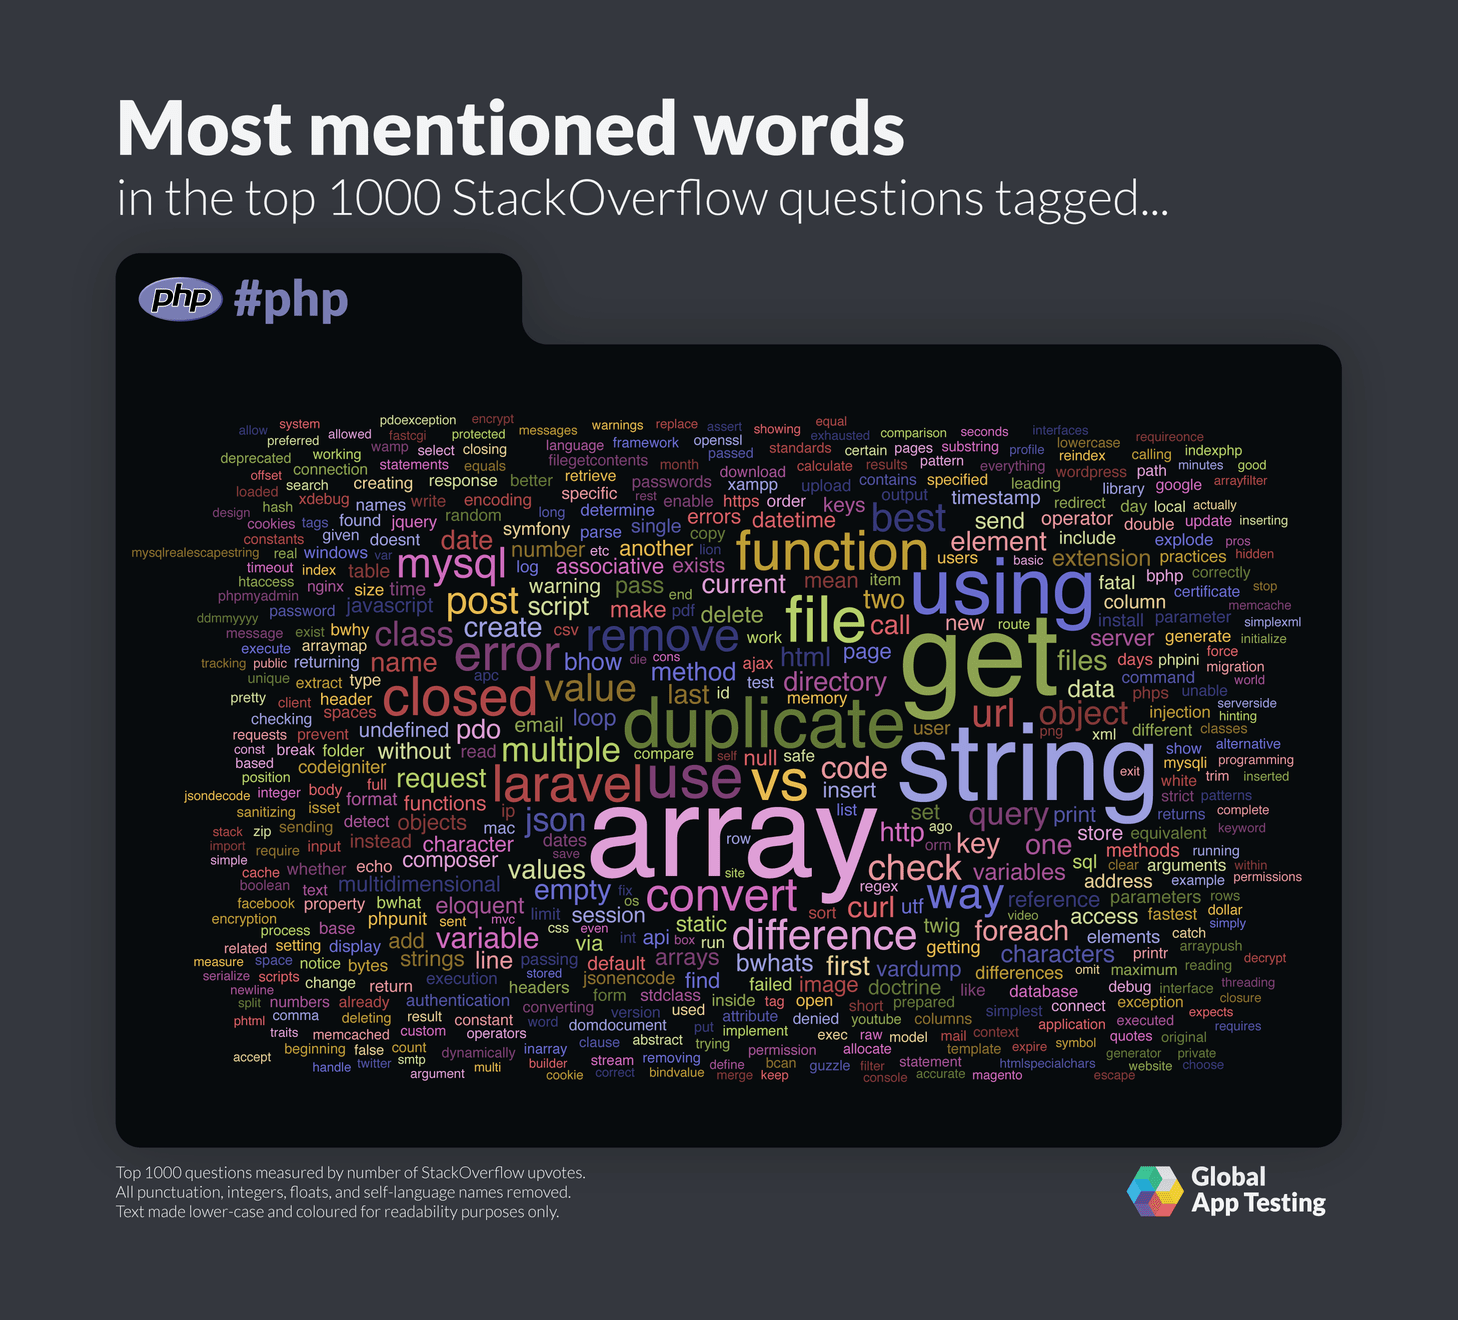 Most mentioned words for PHP on StackOverflow.